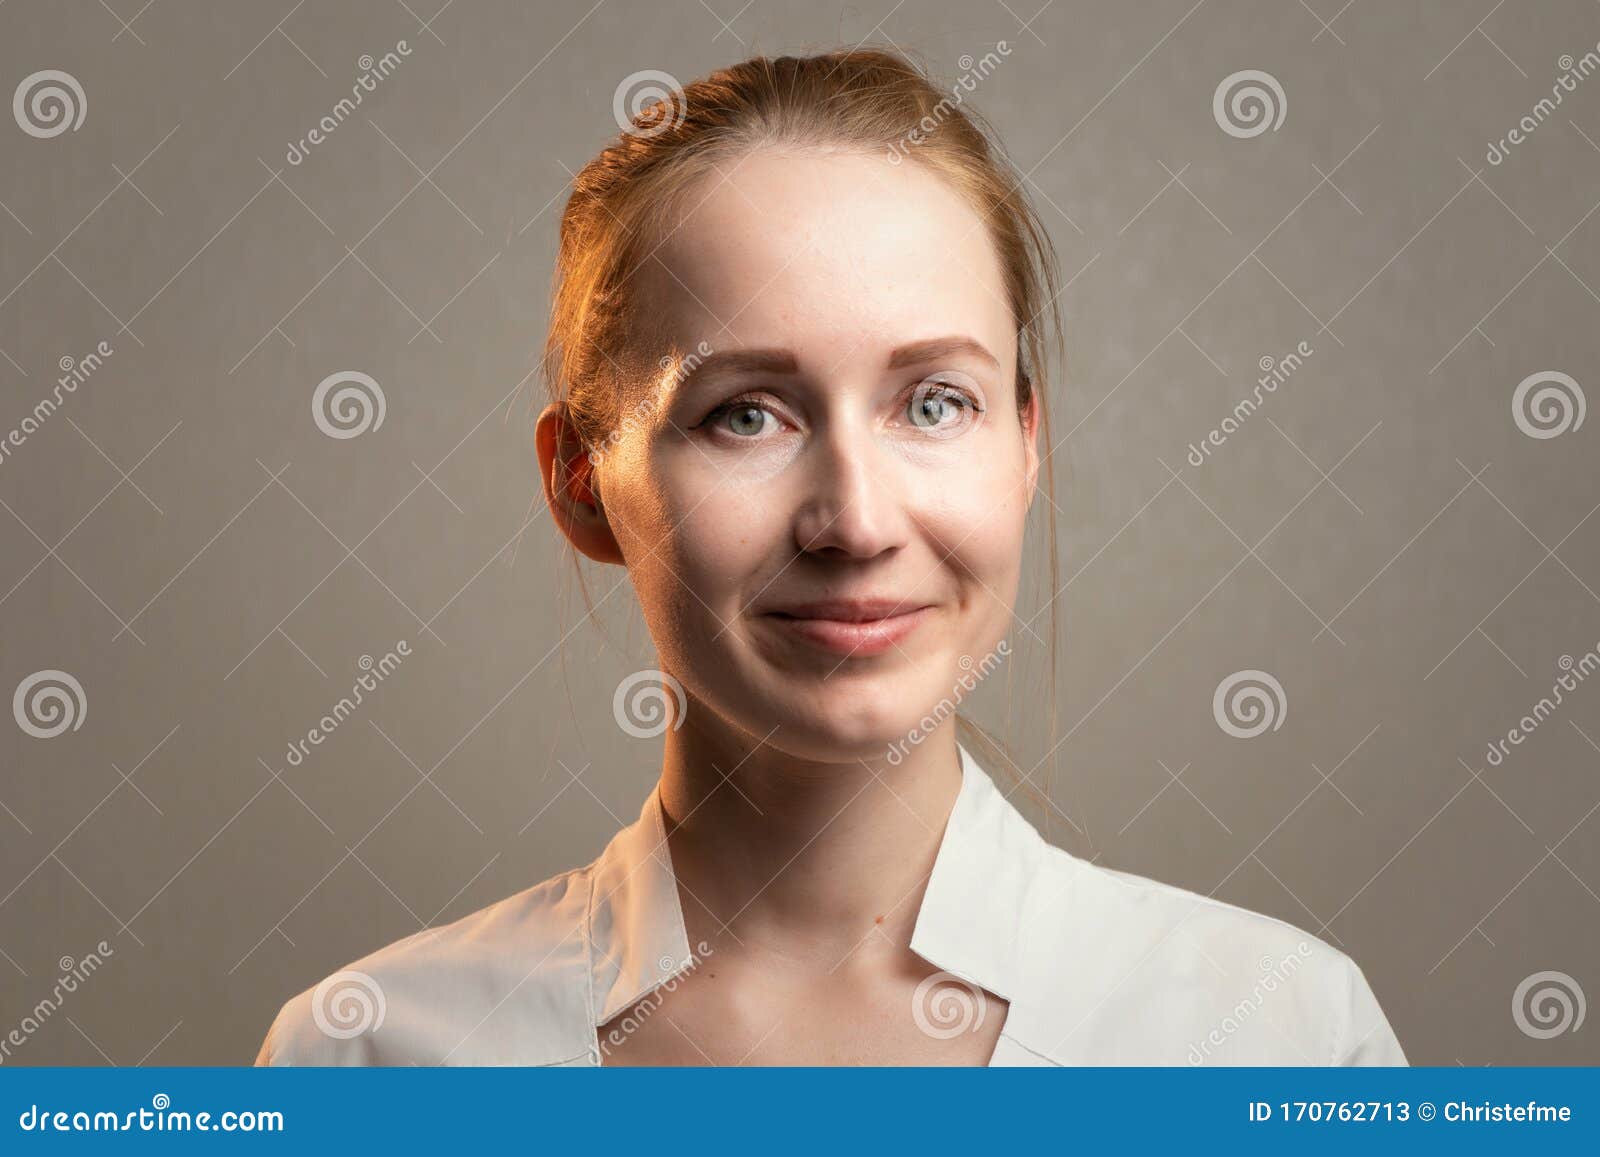 Image of the Young Smiling Friendly Ginger Woman Stock Image - Image of ...